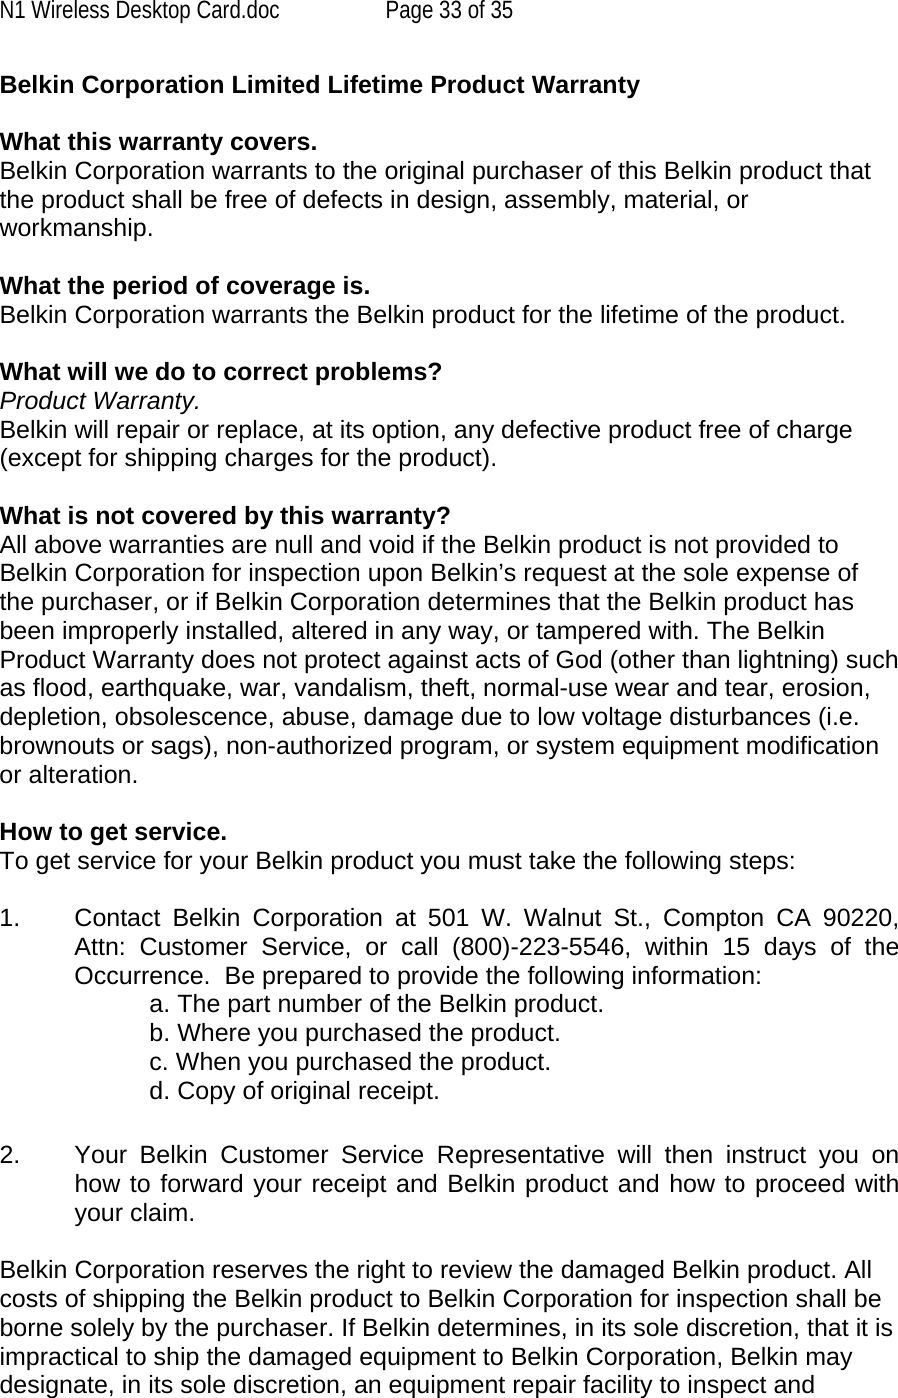 N1 Wireless Desktop Card.doc  Page 33 of 35 Belkin Corporation Limited Lifetime Product Warranty  What this warranty covers. Belkin Corporation warrants to the original purchaser of this Belkin product that the product shall be free of defects in design, assembly, material, or workmanship.   What the period of coverage is. Belkin Corporation warrants the Belkin product for the lifetime of the product.  What will we do to correct problems?  Product Warranty. Belkin will repair or replace, at its option, any defective product free of charge (except for shipping charges for the product).    What is not covered by this warranty? All above warranties are null and void if the Belkin product is not provided to Belkin Corporation for inspection upon Belkin’s request at the sole expense of the purchaser, or if Belkin Corporation determines that the Belkin product has been improperly installed, altered in any way, or tampered with. The Belkin Product Warranty does not protect against acts of God (other than lightning) such as flood, earthquake, war, vandalism, theft, normal-use wear and tear, erosion, depletion, obsolescence, abuse, damage due to low voltage disturbances (i.e. brownouts or sags), non-authorized program, or system equipment modification or alteration.  How to get service.    To get service for your Belkin product you must take the following steps:  1.  Contact Belkin Corporation at 501 W. Walnut St., Compton CA 90220, Attn: Customer Service, or call (800)-223-5546, within 15 days of the Occurrence.  Be prepared to provide the following information: a. The part number of the Belkin product. b. Where you purchased the product. c. When you purchased the product. d. Copy of original receipt.  2.  Your Belkin Customer Service Representative will then instruct you on how to forward your receipt and Belkin product and how to proceed with your claim.  Belkin Corporation reserves the right to review the damaged Belkin product. All costs of shipping the Belkin product to Belkin Corporation for inspection shall be borne solely by the purchaser. If Belkin determines, in its sole discretion, that it is impractical to ship the damaged equipment to Belkin Corporation, Belkin may designate, in its sole discretion, an equipment repair facility to inspect and 